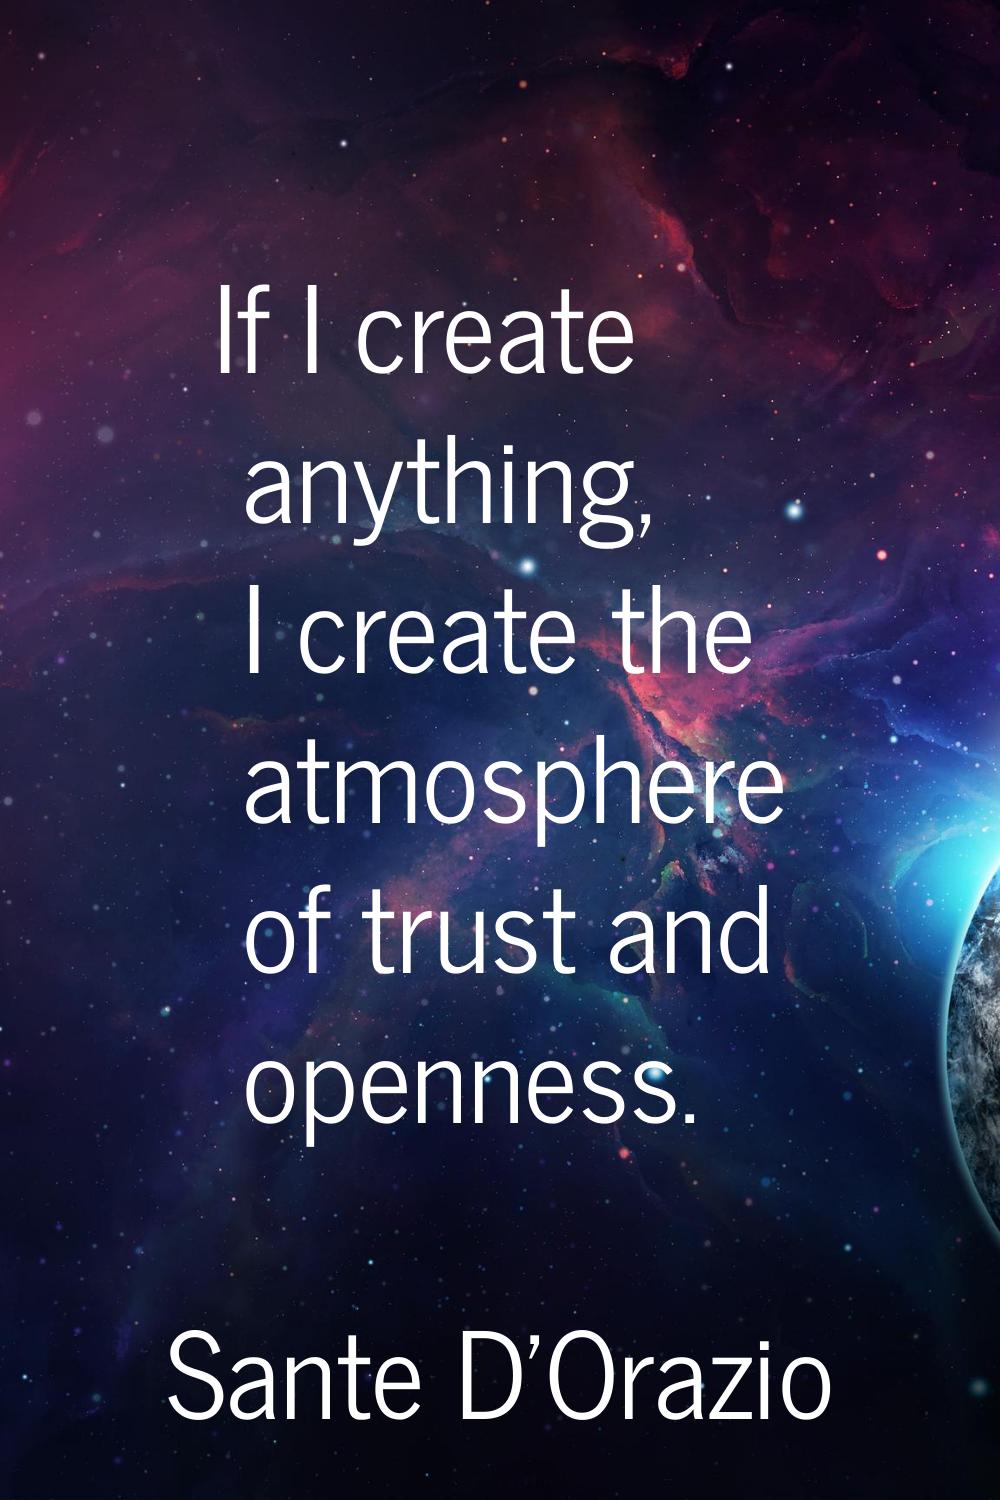 If I create anything, I create the atmosphere of trust and openness.